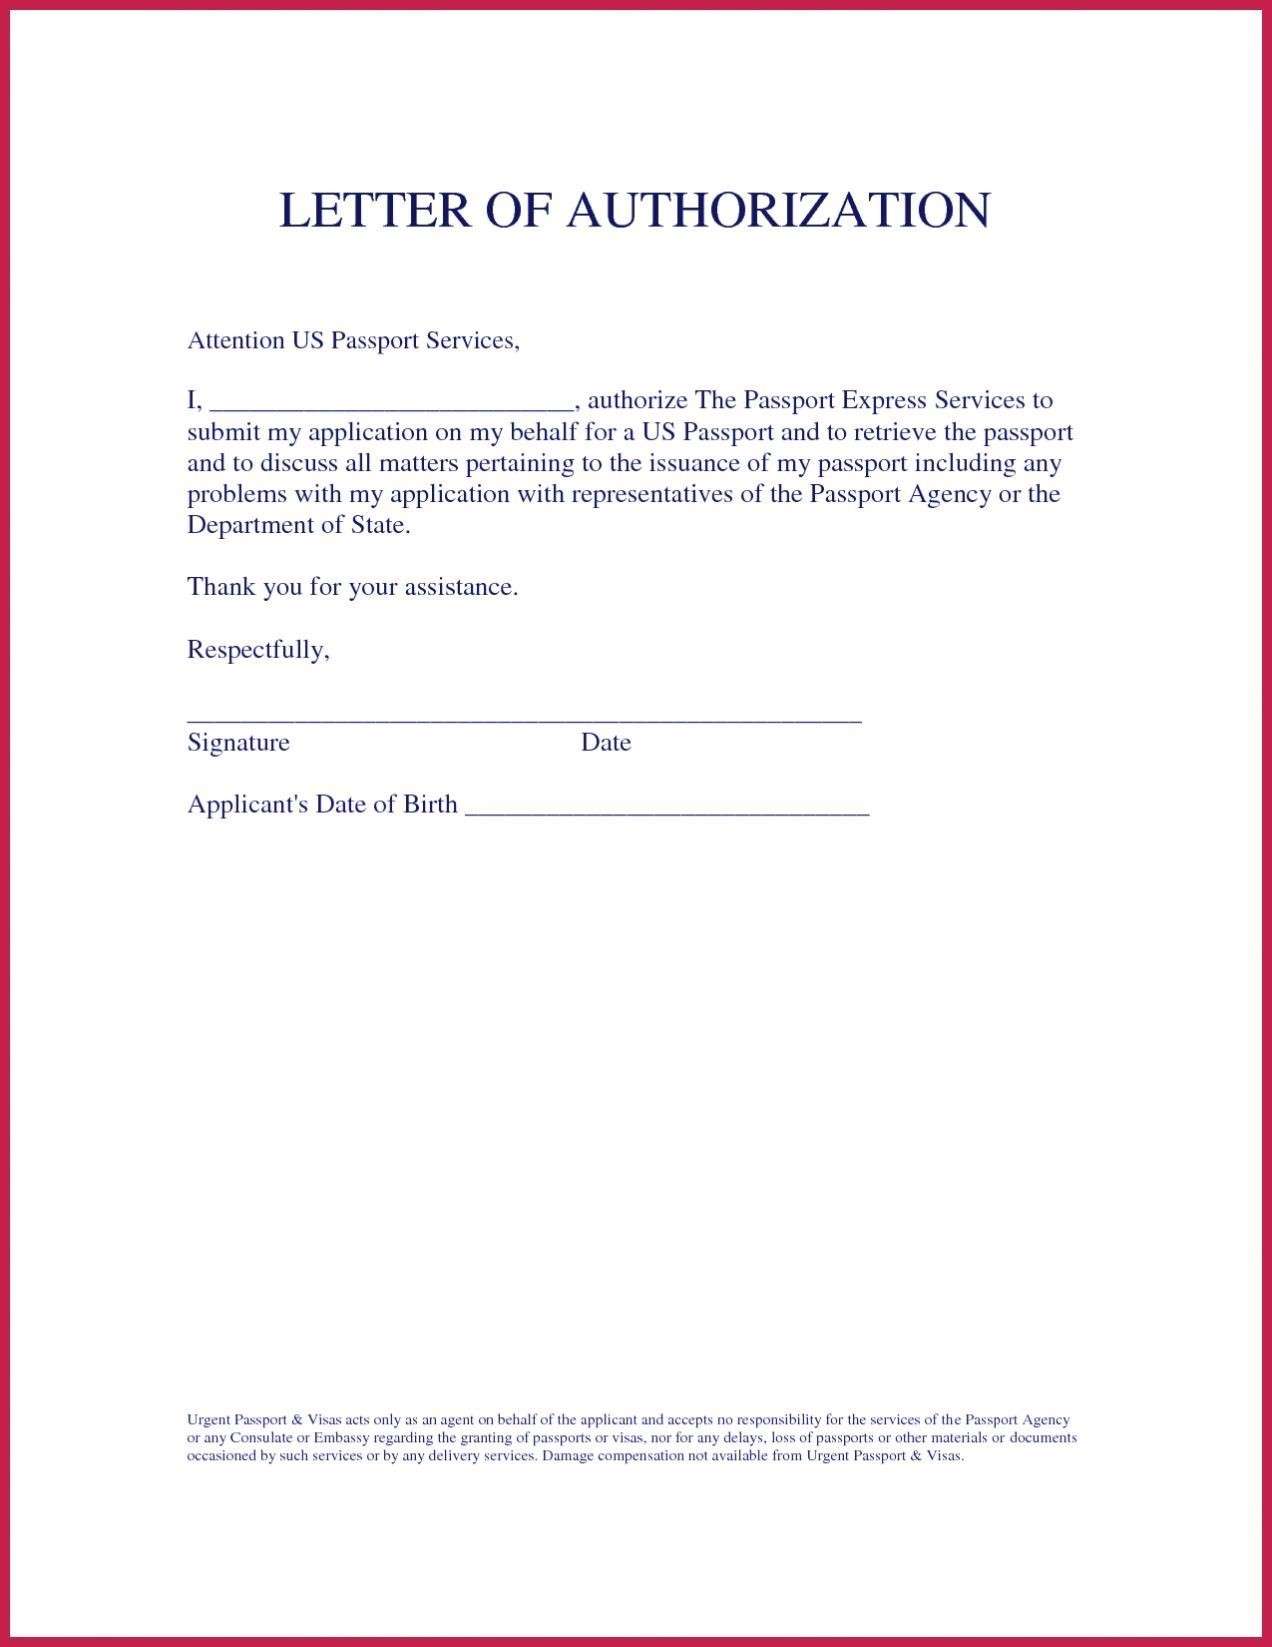 home-state-health-prior-auth-form-jpagraphicdesign-authorization